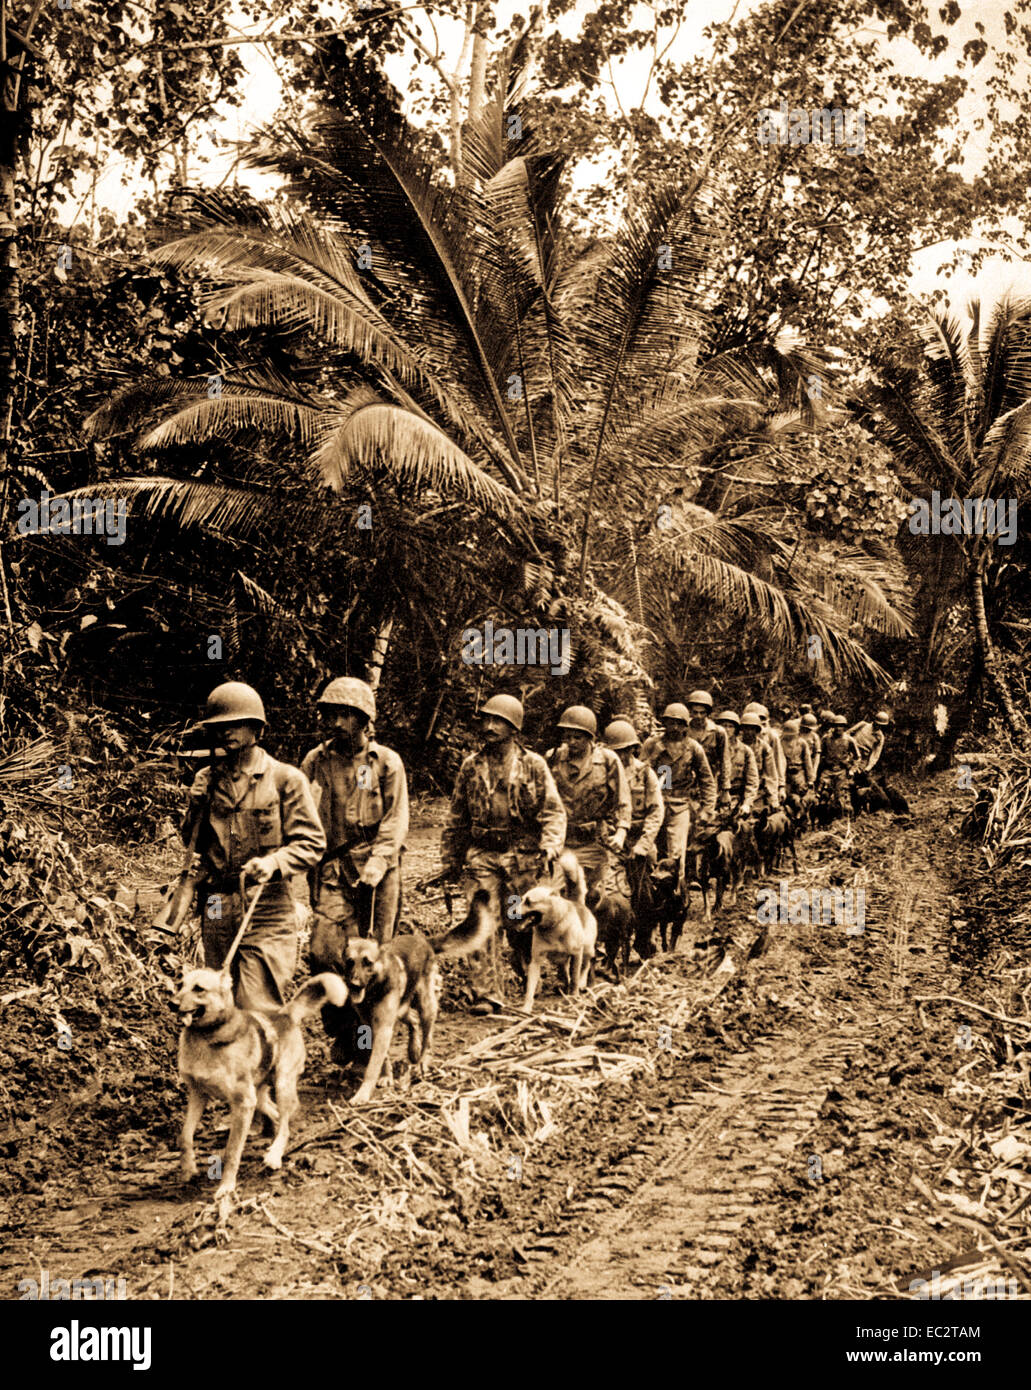 U.S. Marine 'Raiders' and their dogs, which are used for scouting and running messages, starting off for the jungle front lines on Bougainville.  Circa November/December 1943.  Photo by T.Sgt. J. Sarno.  (Marine Corps) Stock Photo